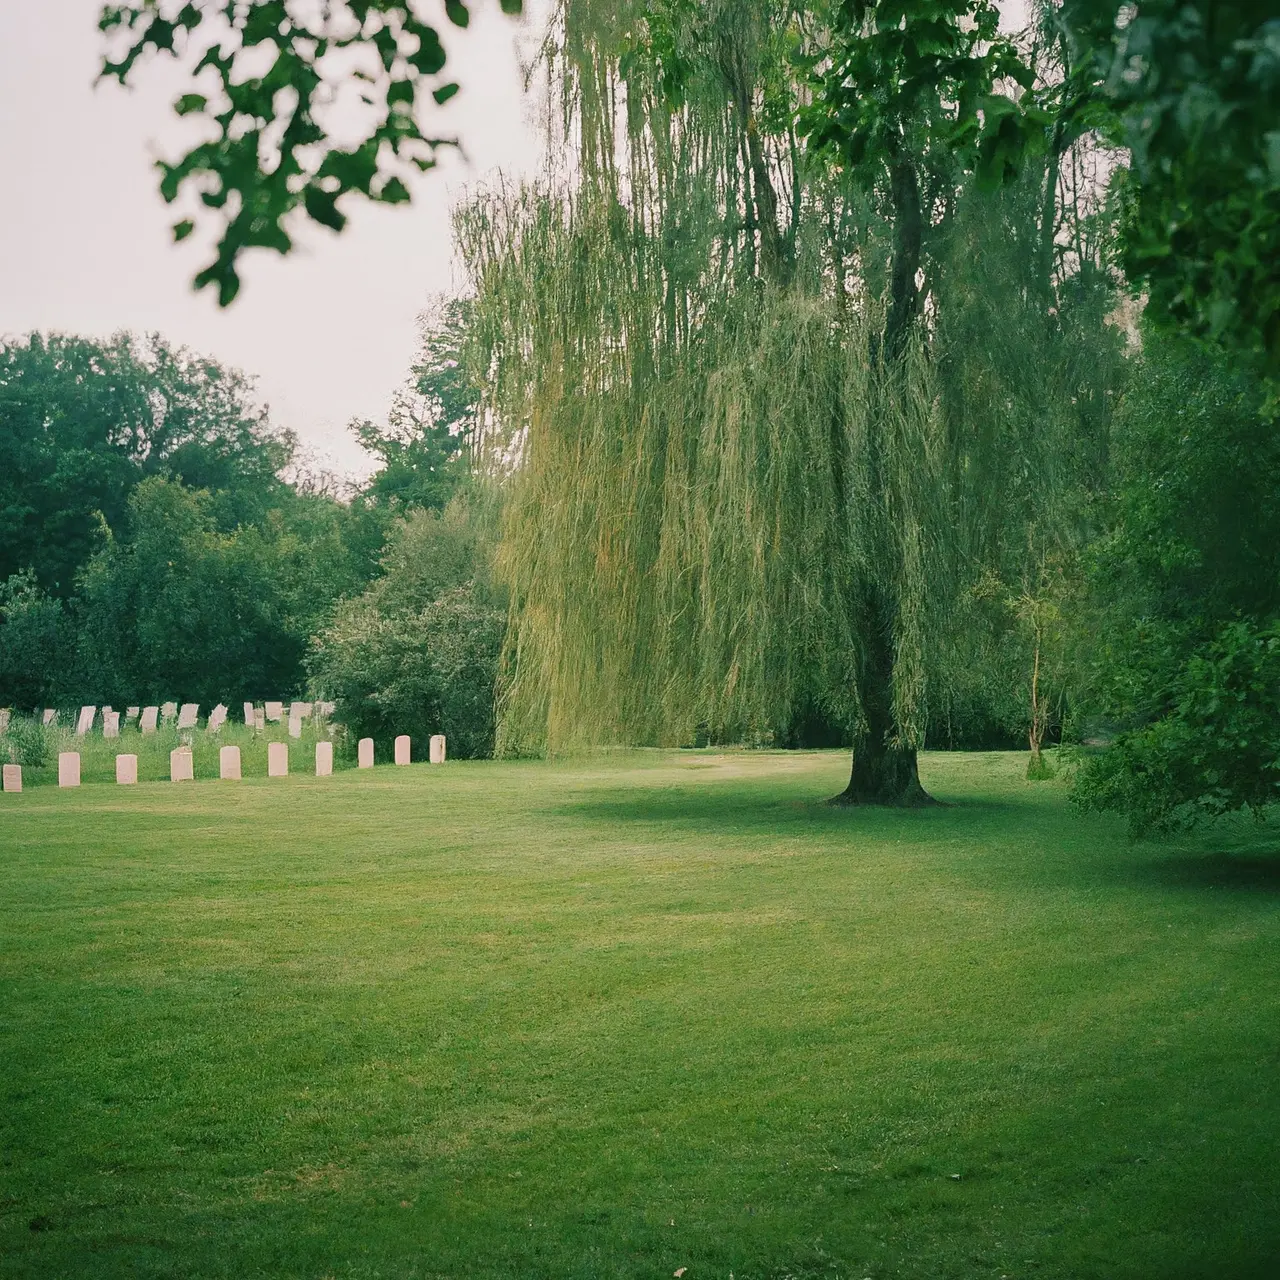 A serene green burial site in a beautiful natural setting. 35mm stock photo